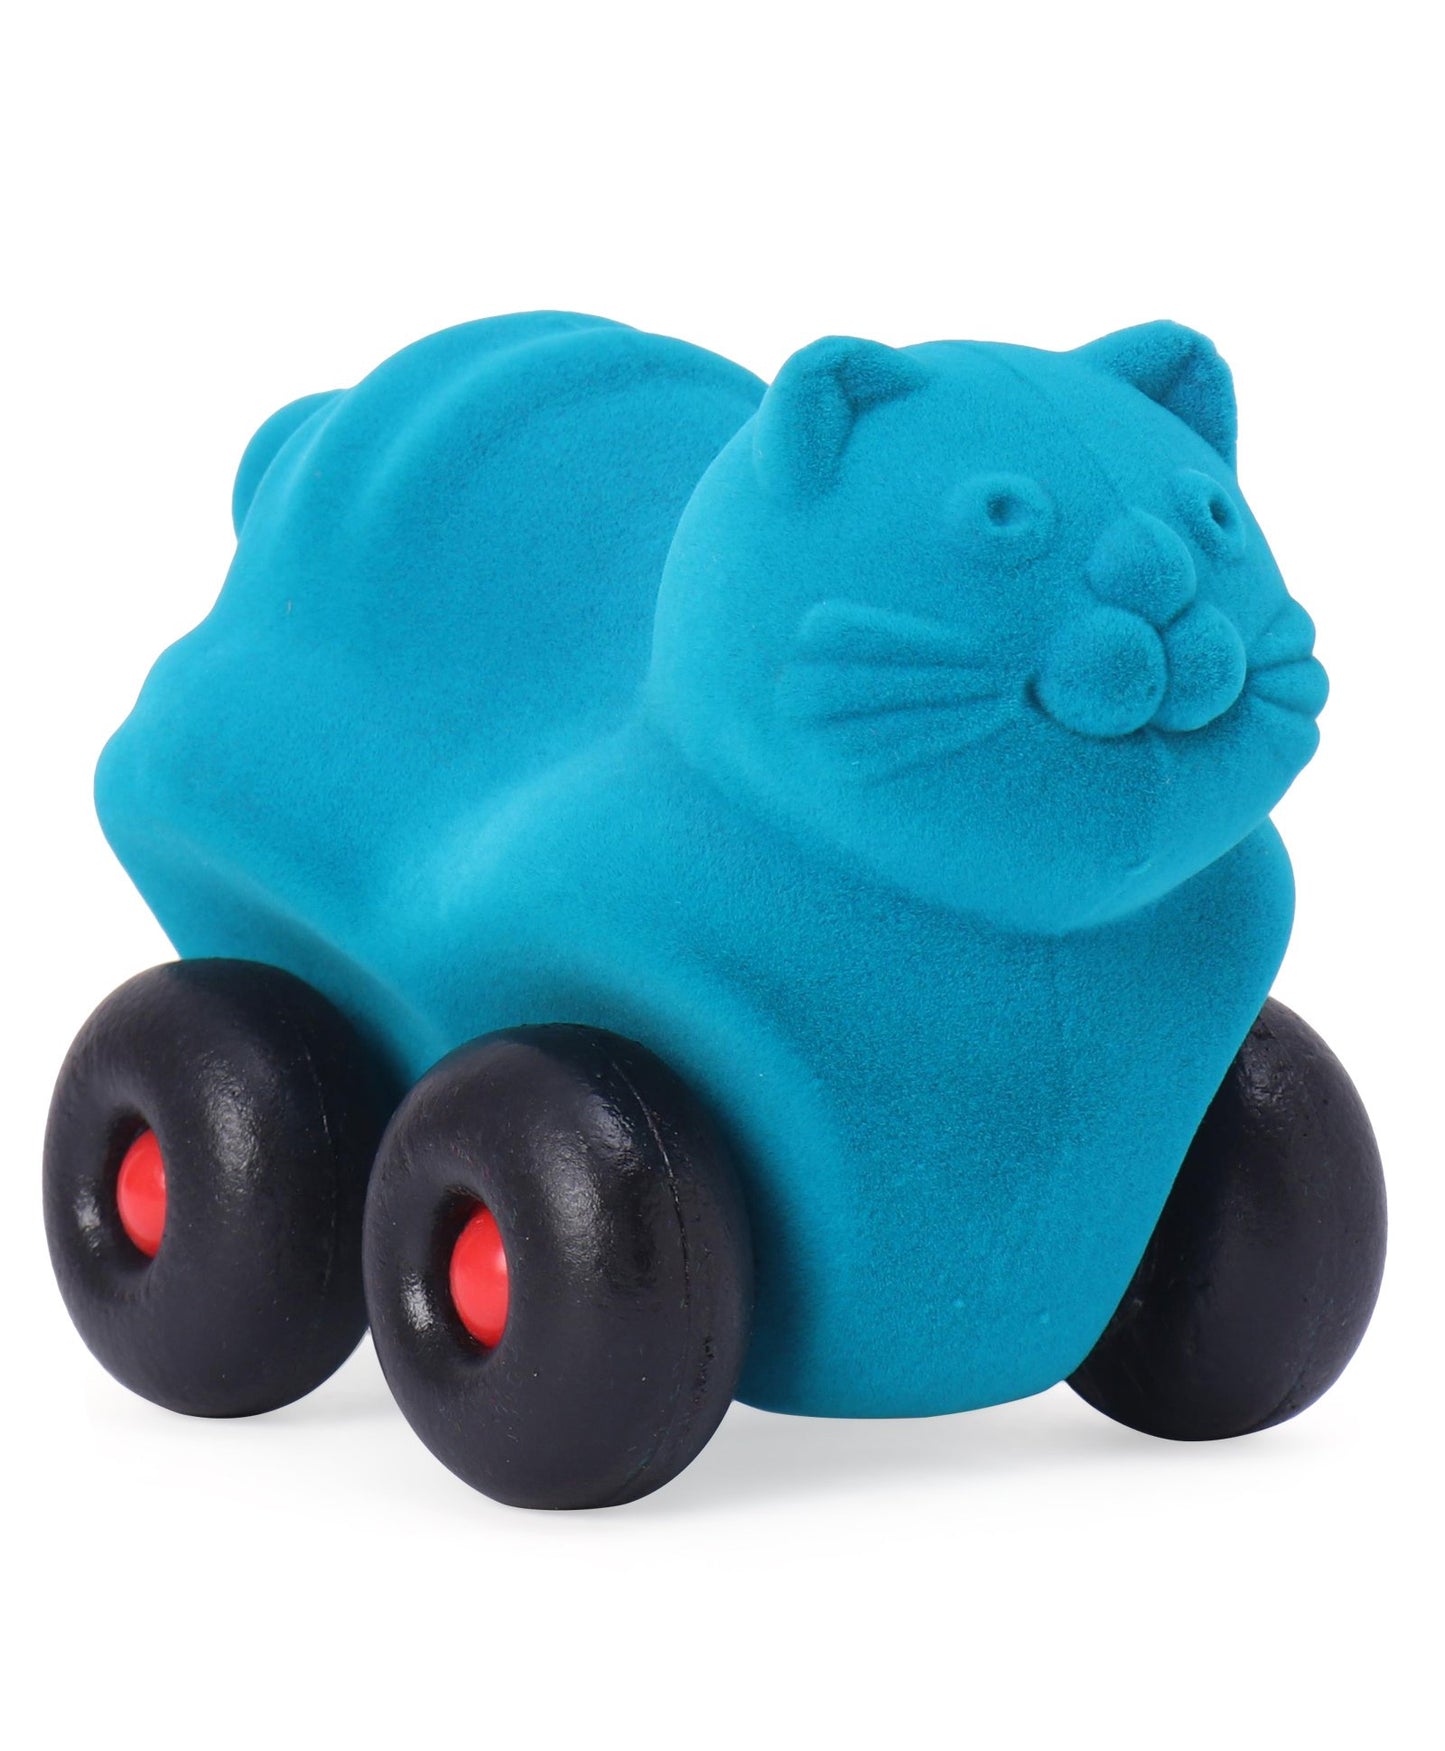 Rubbabu Free Wheel Little Animal Shaped Toy Cars - Pack of 6 (Colour May Vary)